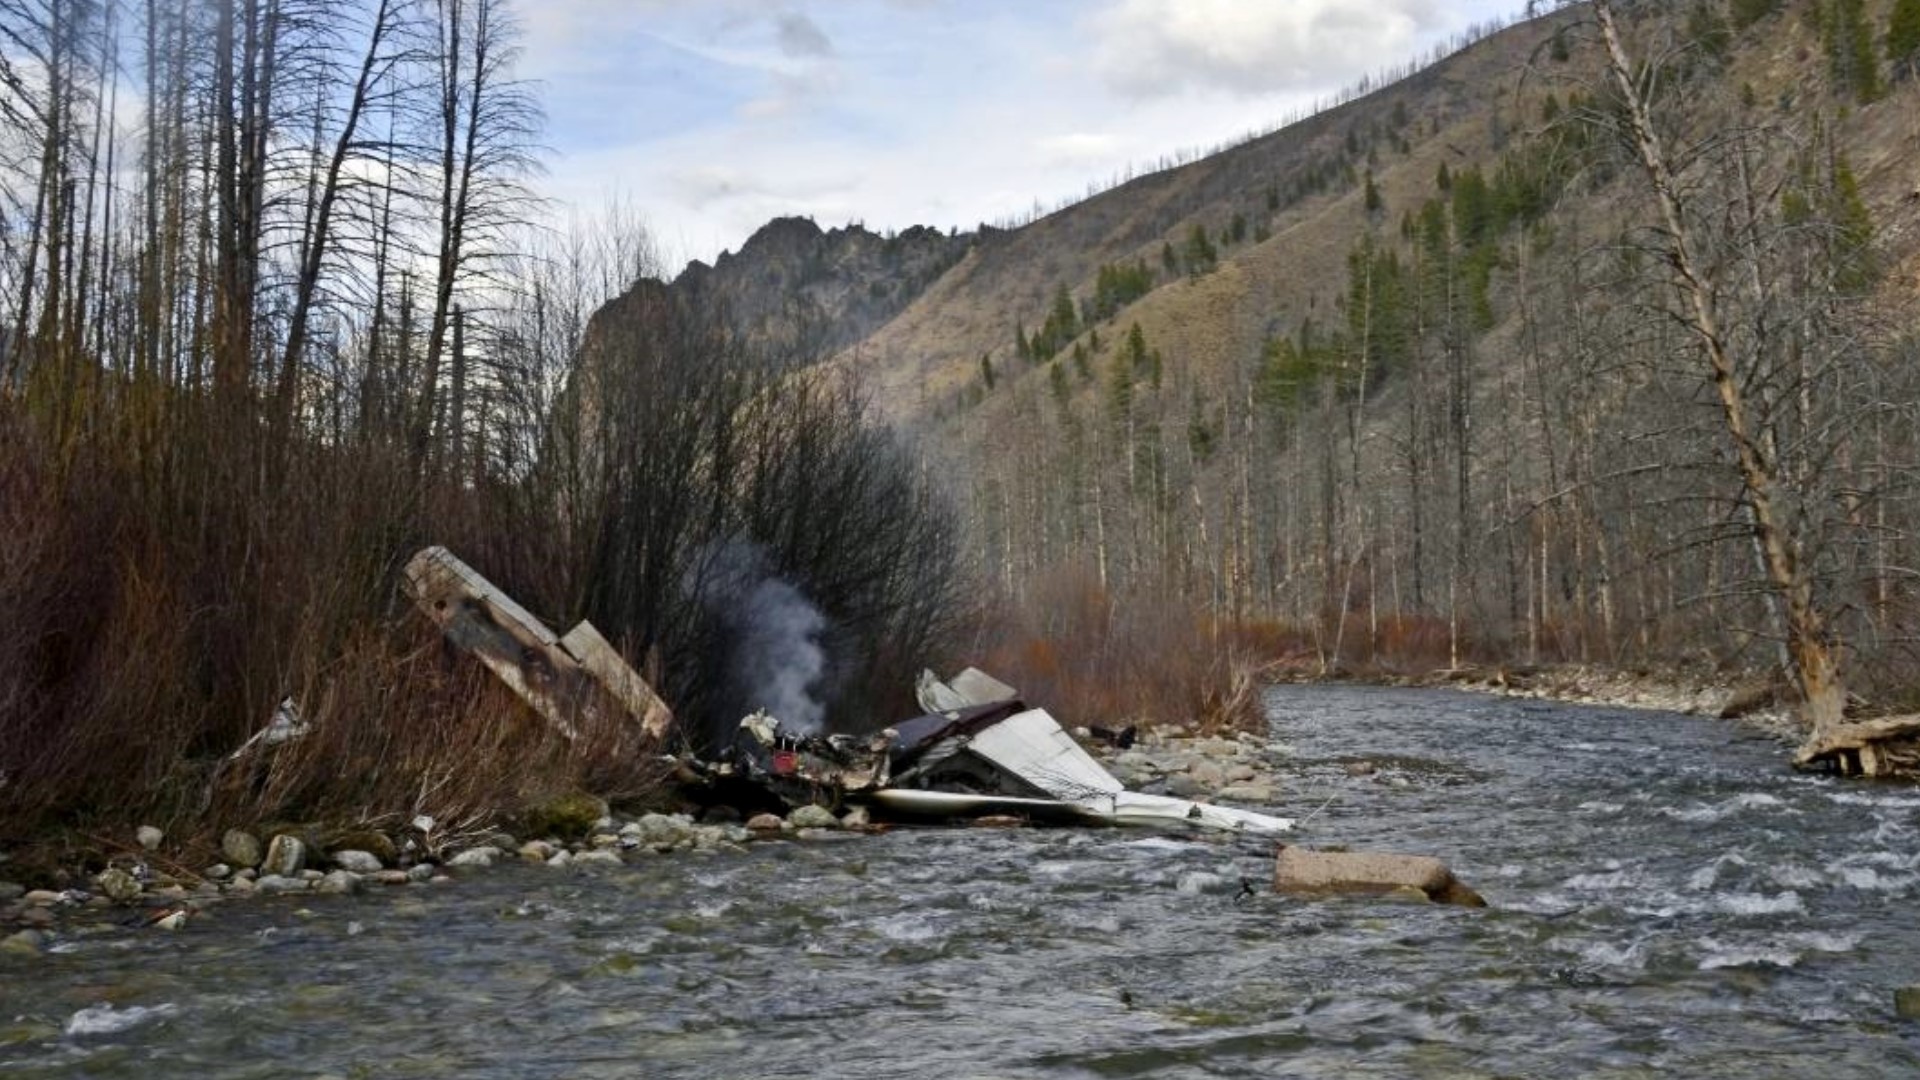 Federal agency says it's not to blame for fatal plane crash in Idaho